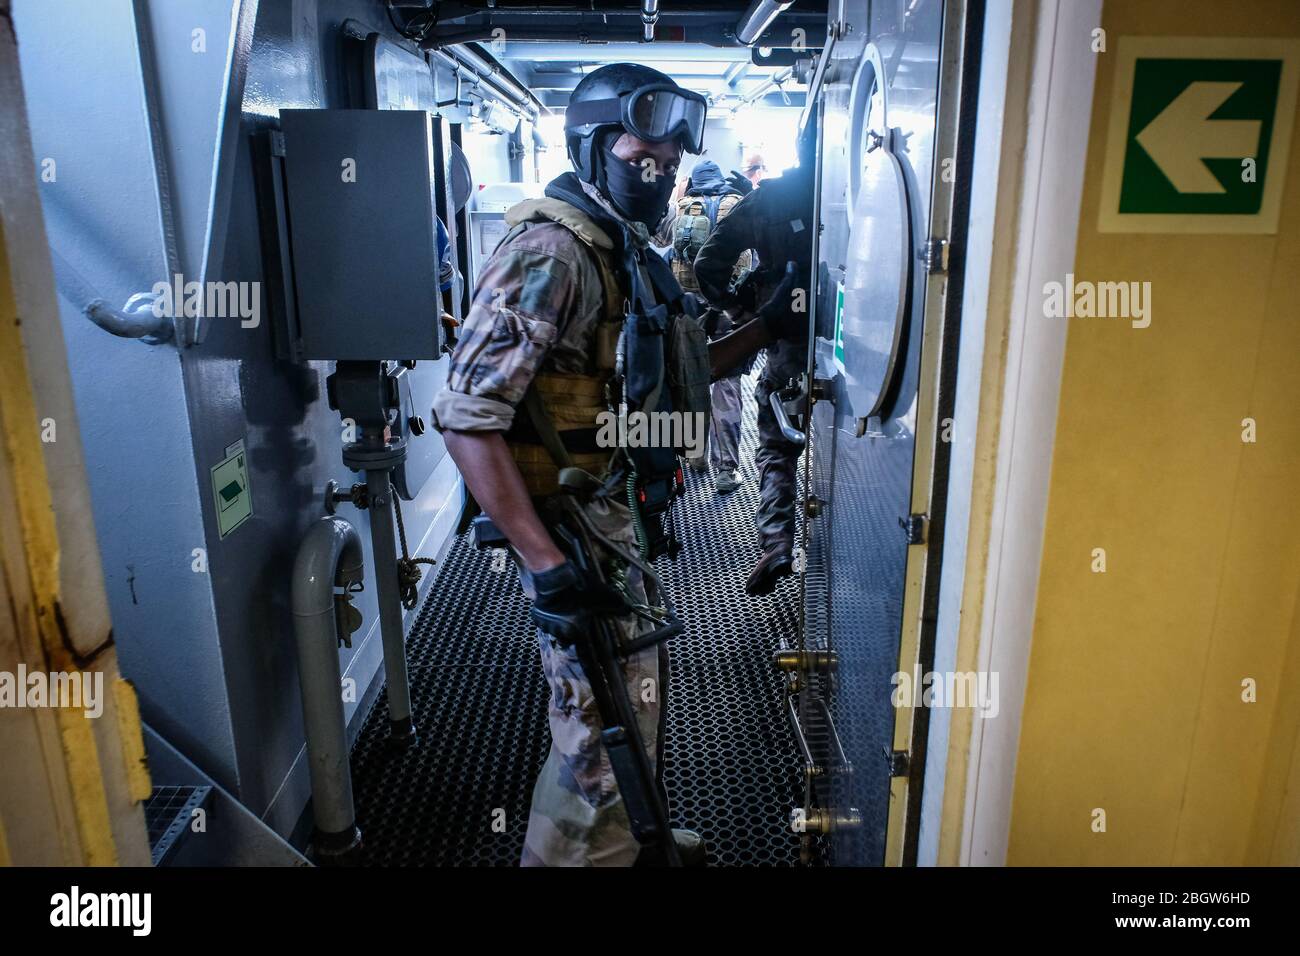 KOUROU, FRANCE - DECEMBER 18: soldiers in a naval ship during the Titan Operation in french Guyana, Guyane, Kourou, France on December 18, 2018 in Kou Stock Photo